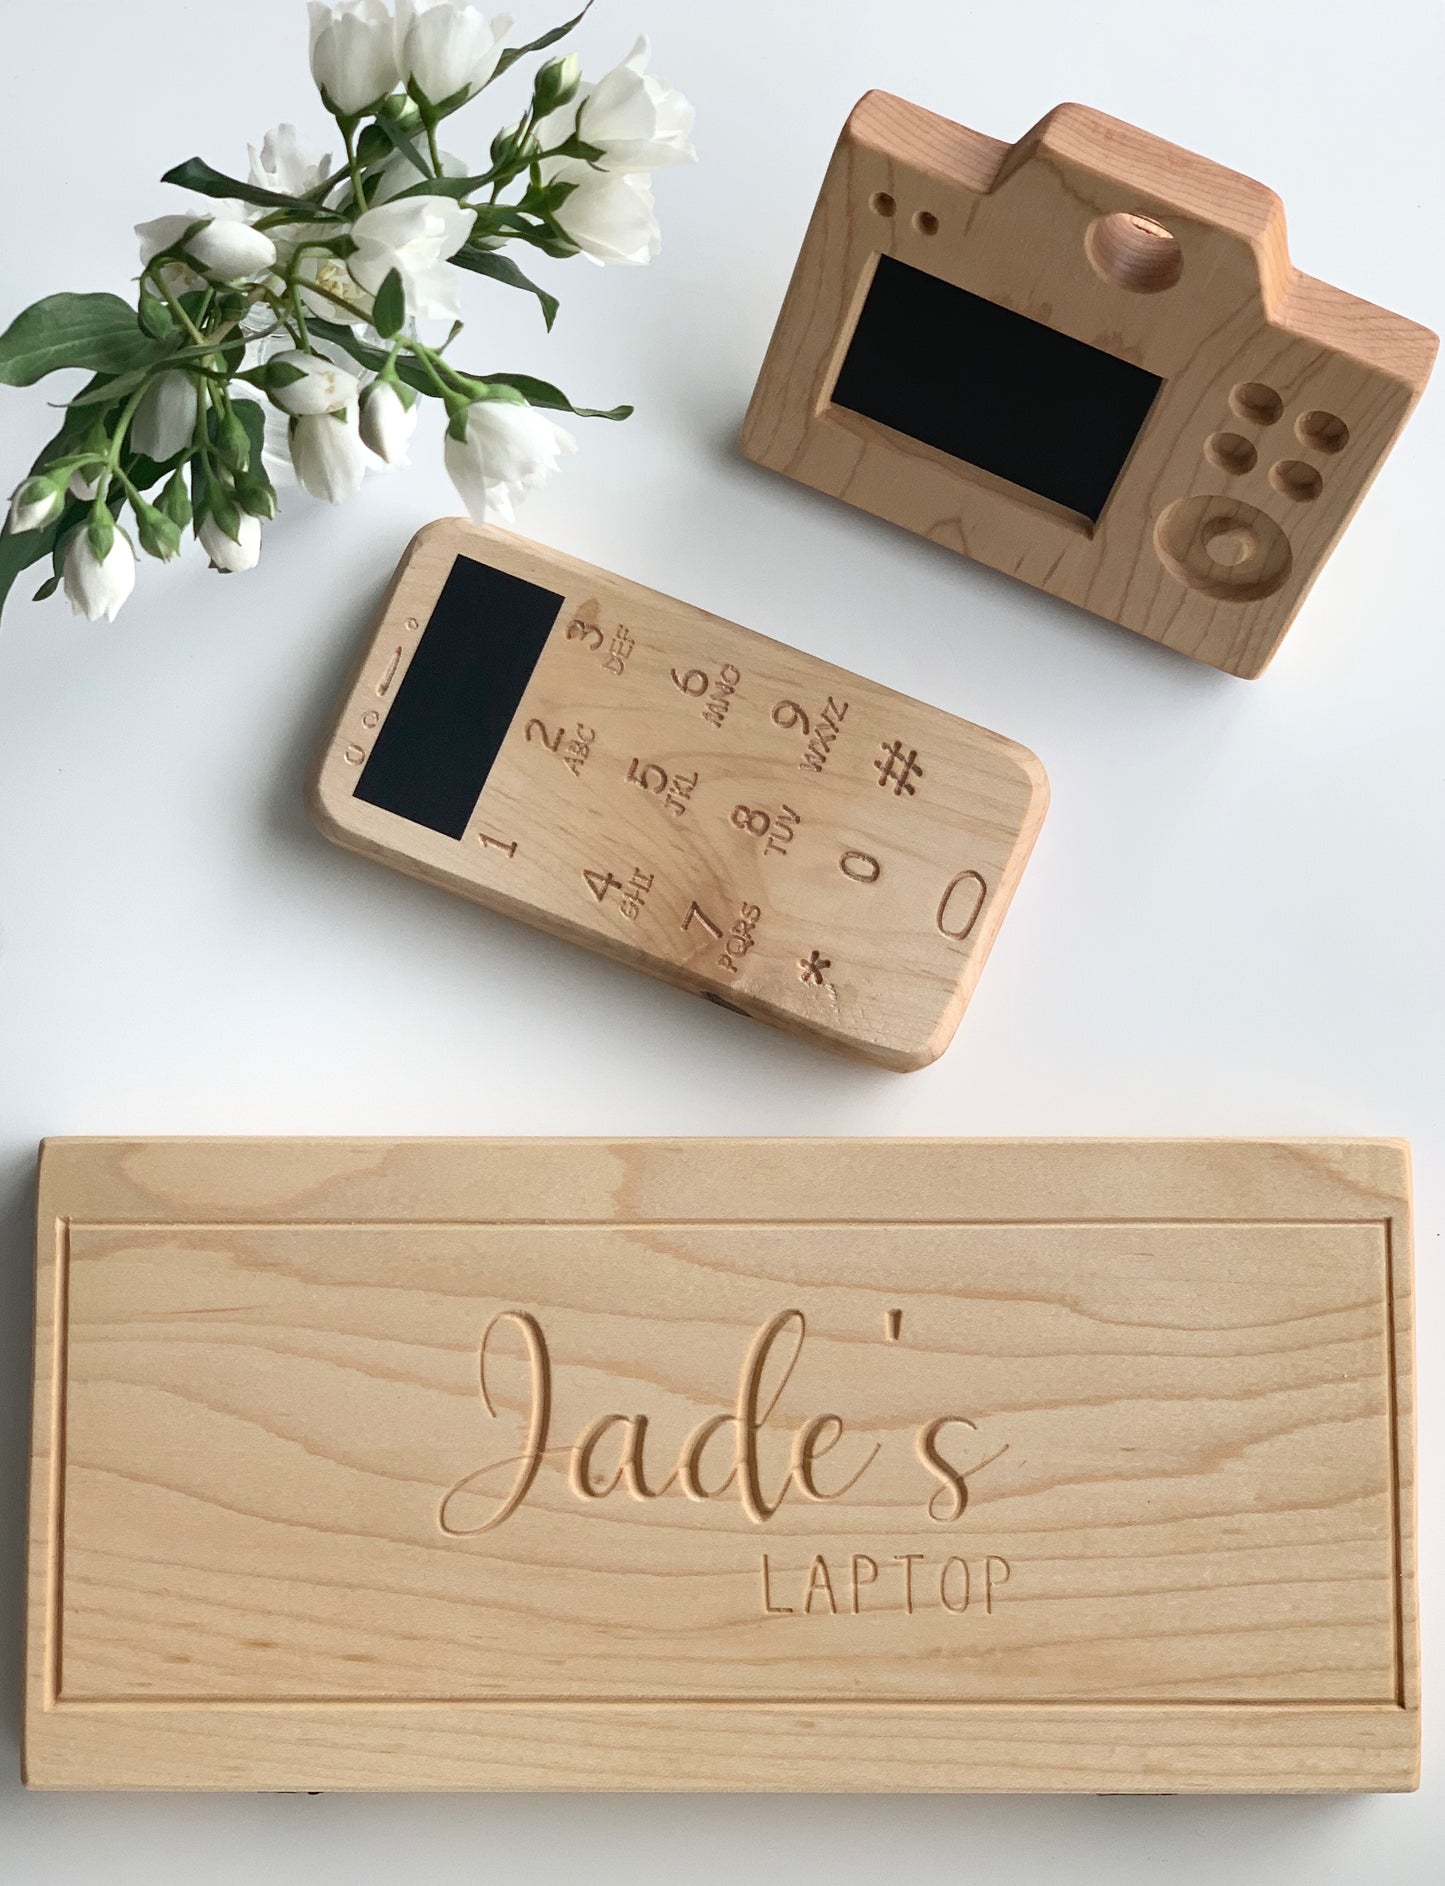 Wooden Laptop Toy Computer with Chalkboard